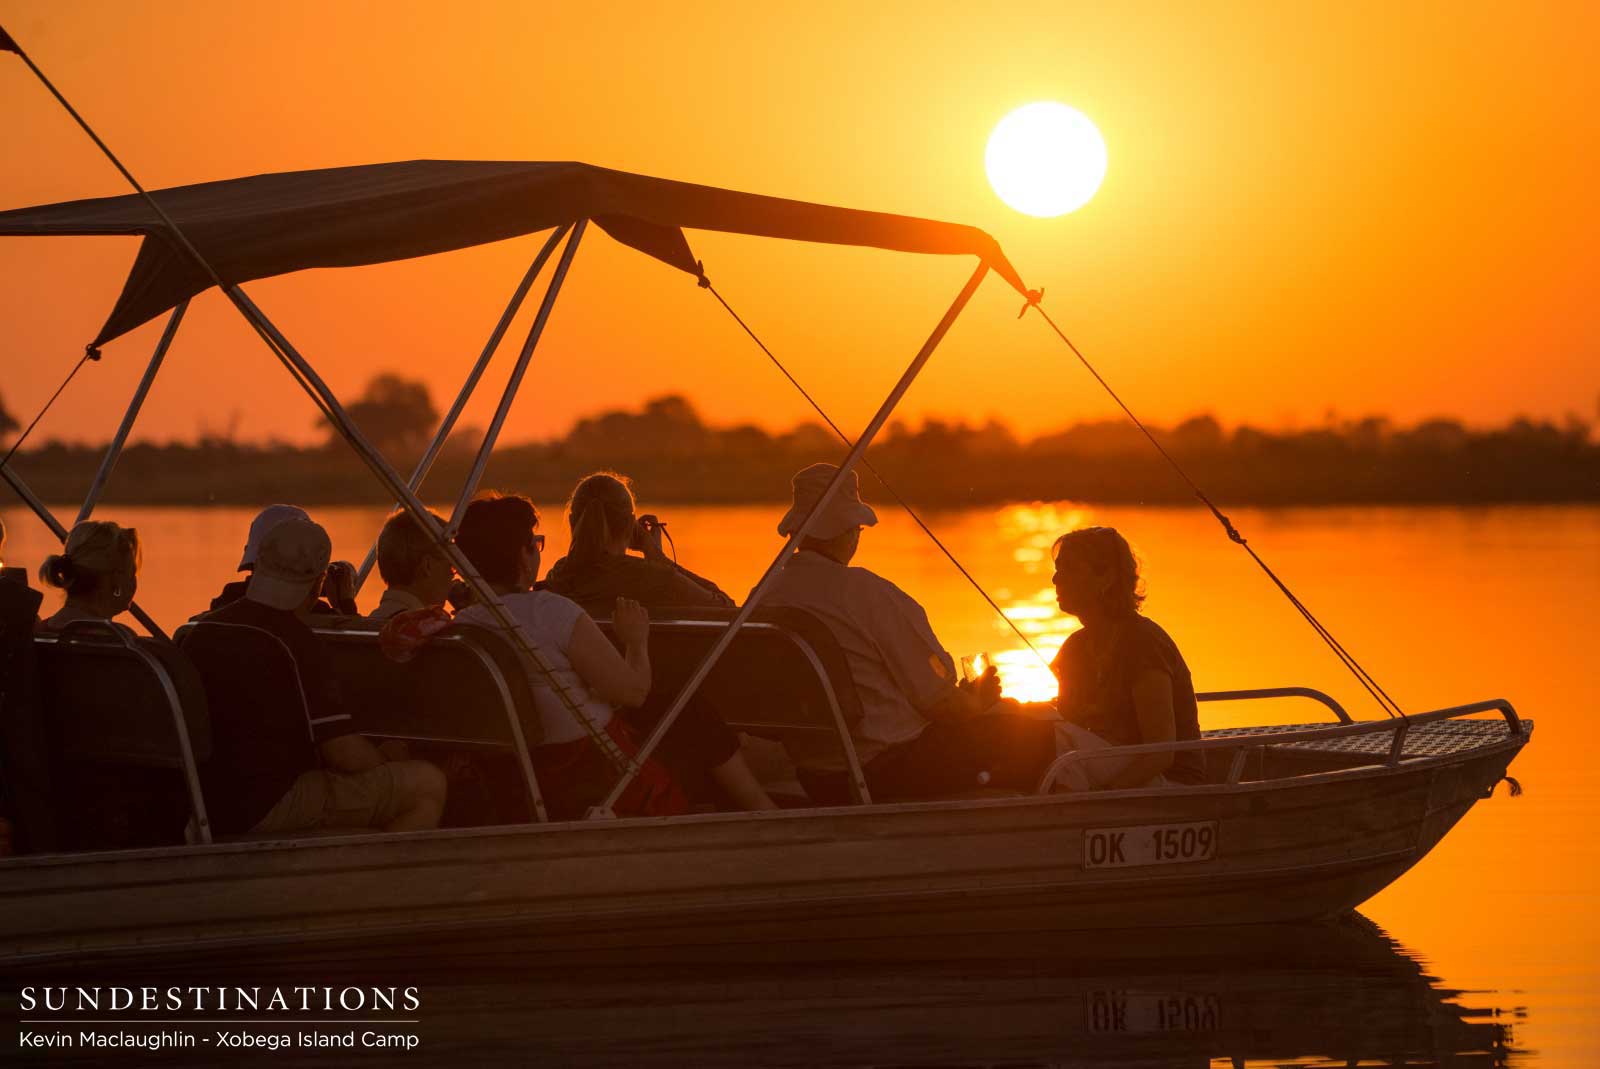 Xobega Island guests admire the sunset from their boat in the Okavango Delta